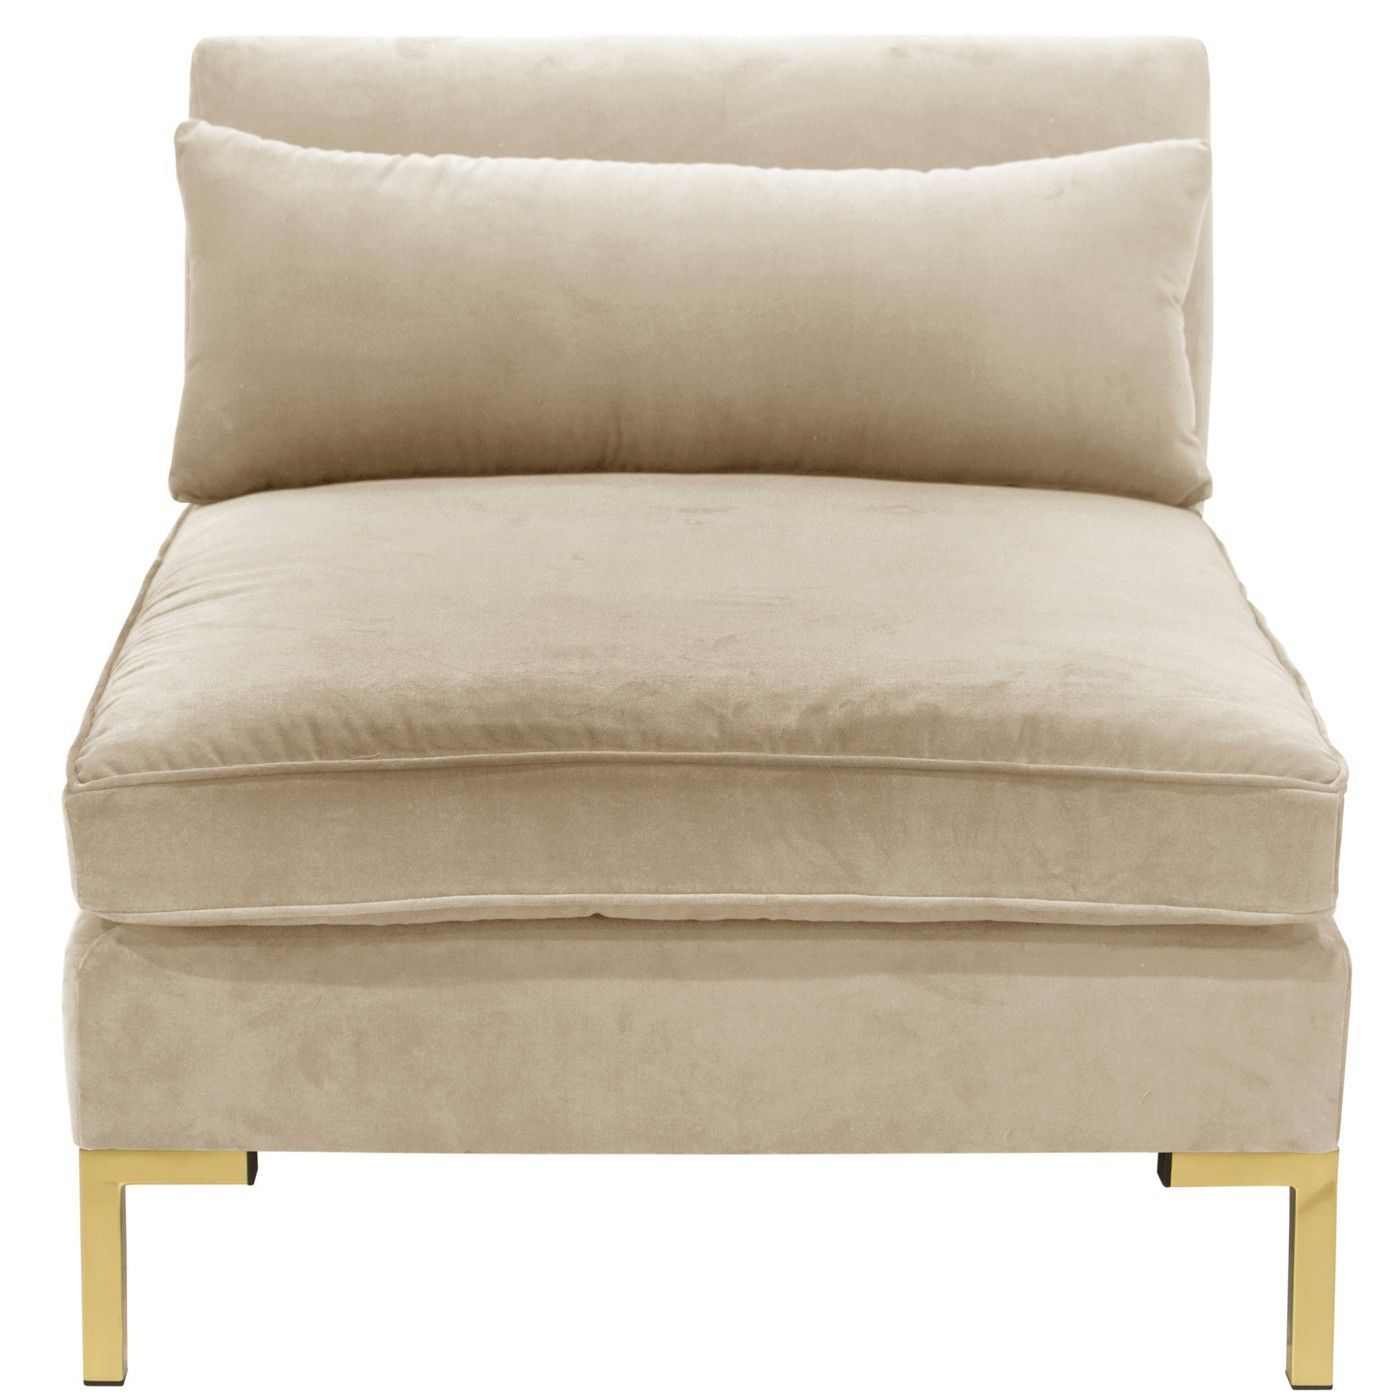 Alexis Armless Chair With Brass Metal Y Legs – Skyline In 4Pc Alexis Sectional Sofas With Silver Metal Y Legs (View 13 of 15)